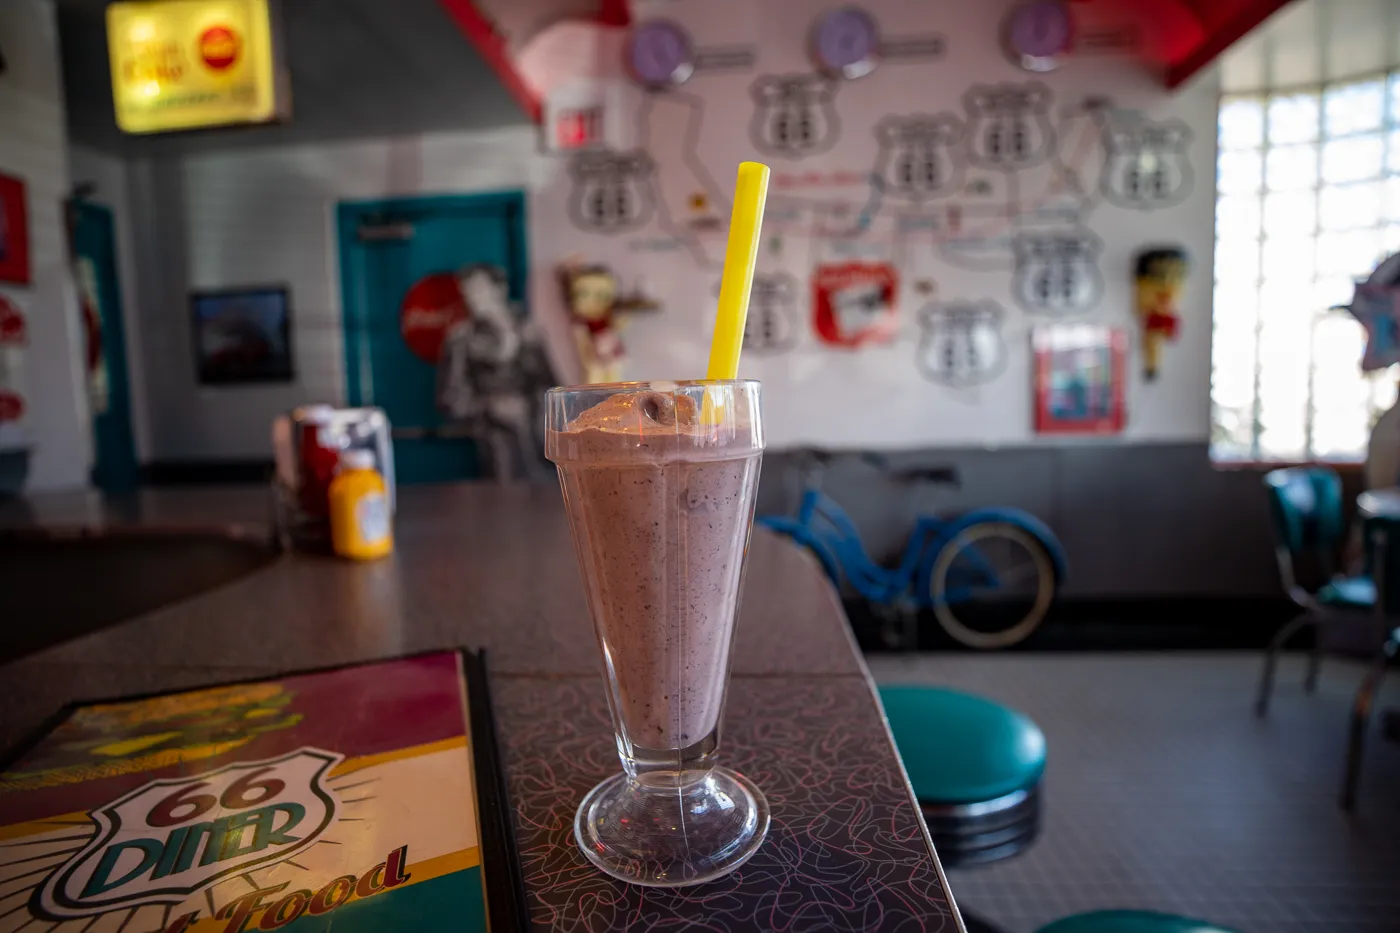 Pink Cadillac milkshake - strawberry milkshake with Oreos at 66 Diner in Albuquerque, New Mexico Route 66 restaurant and roadside attraction